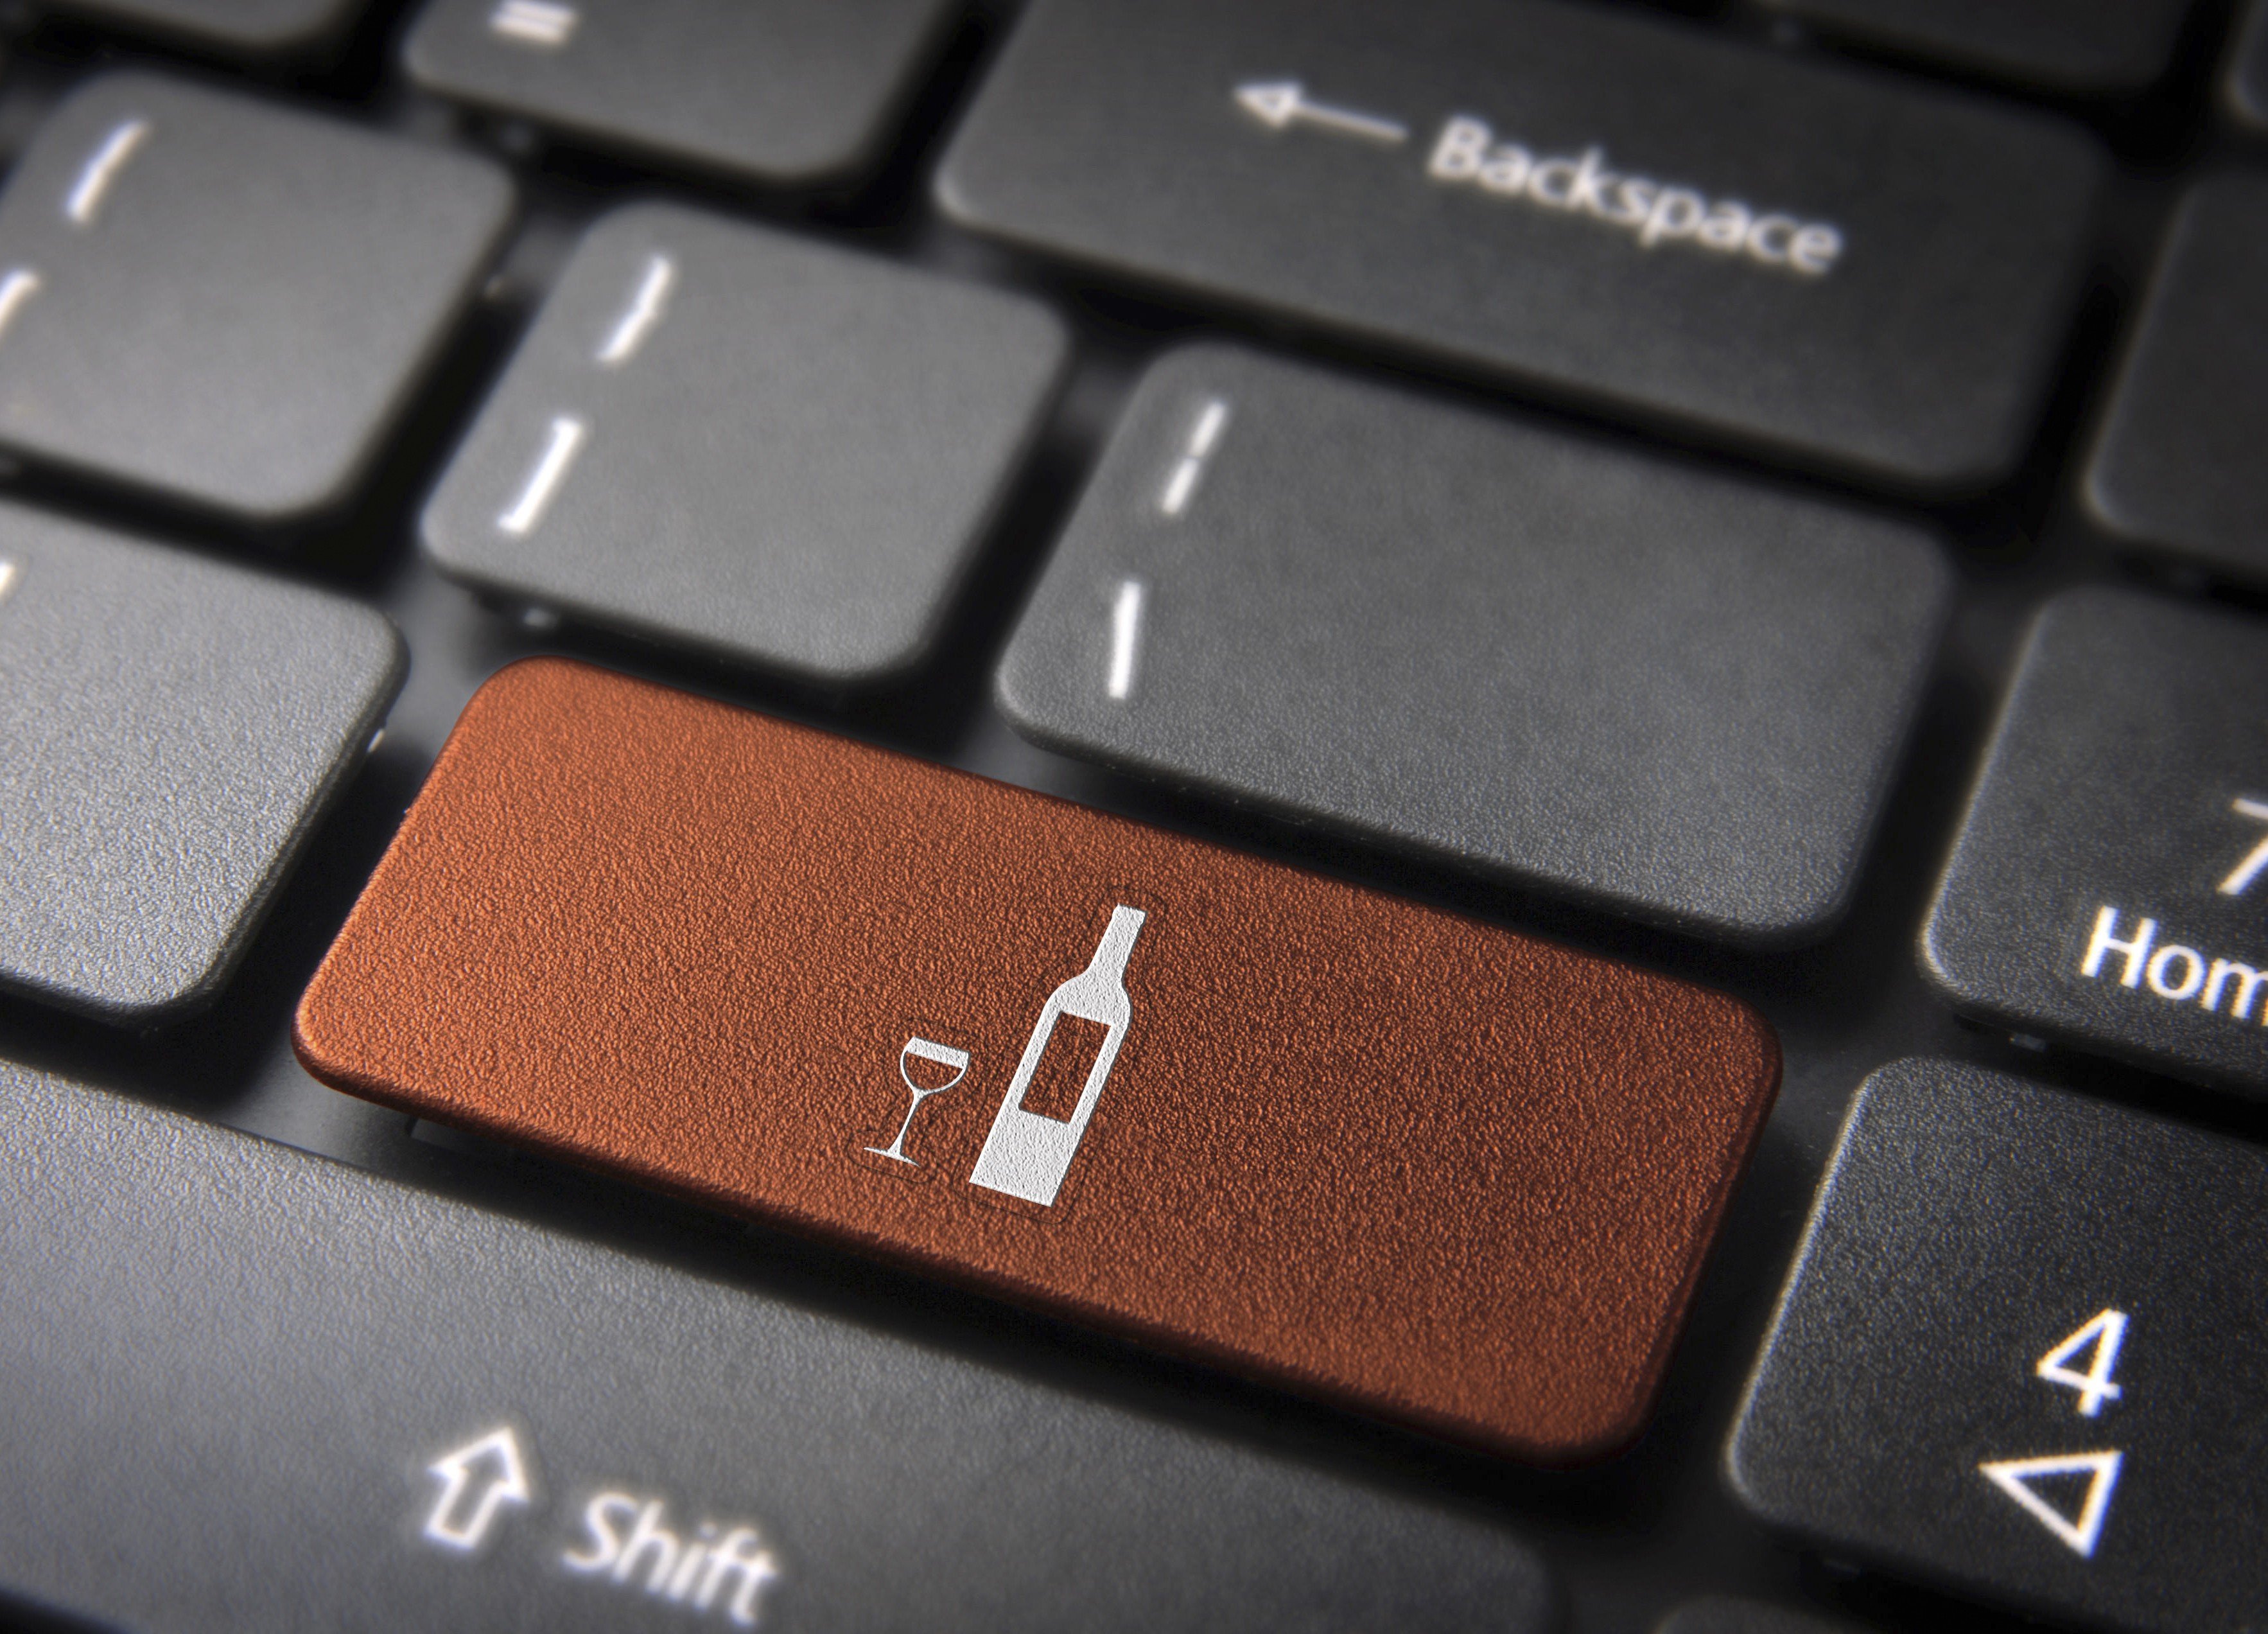 The advantage of e-commerce in China is that it’s both consolidated and diverse, writes wine expert Sarah Heller. Photo: Alamy